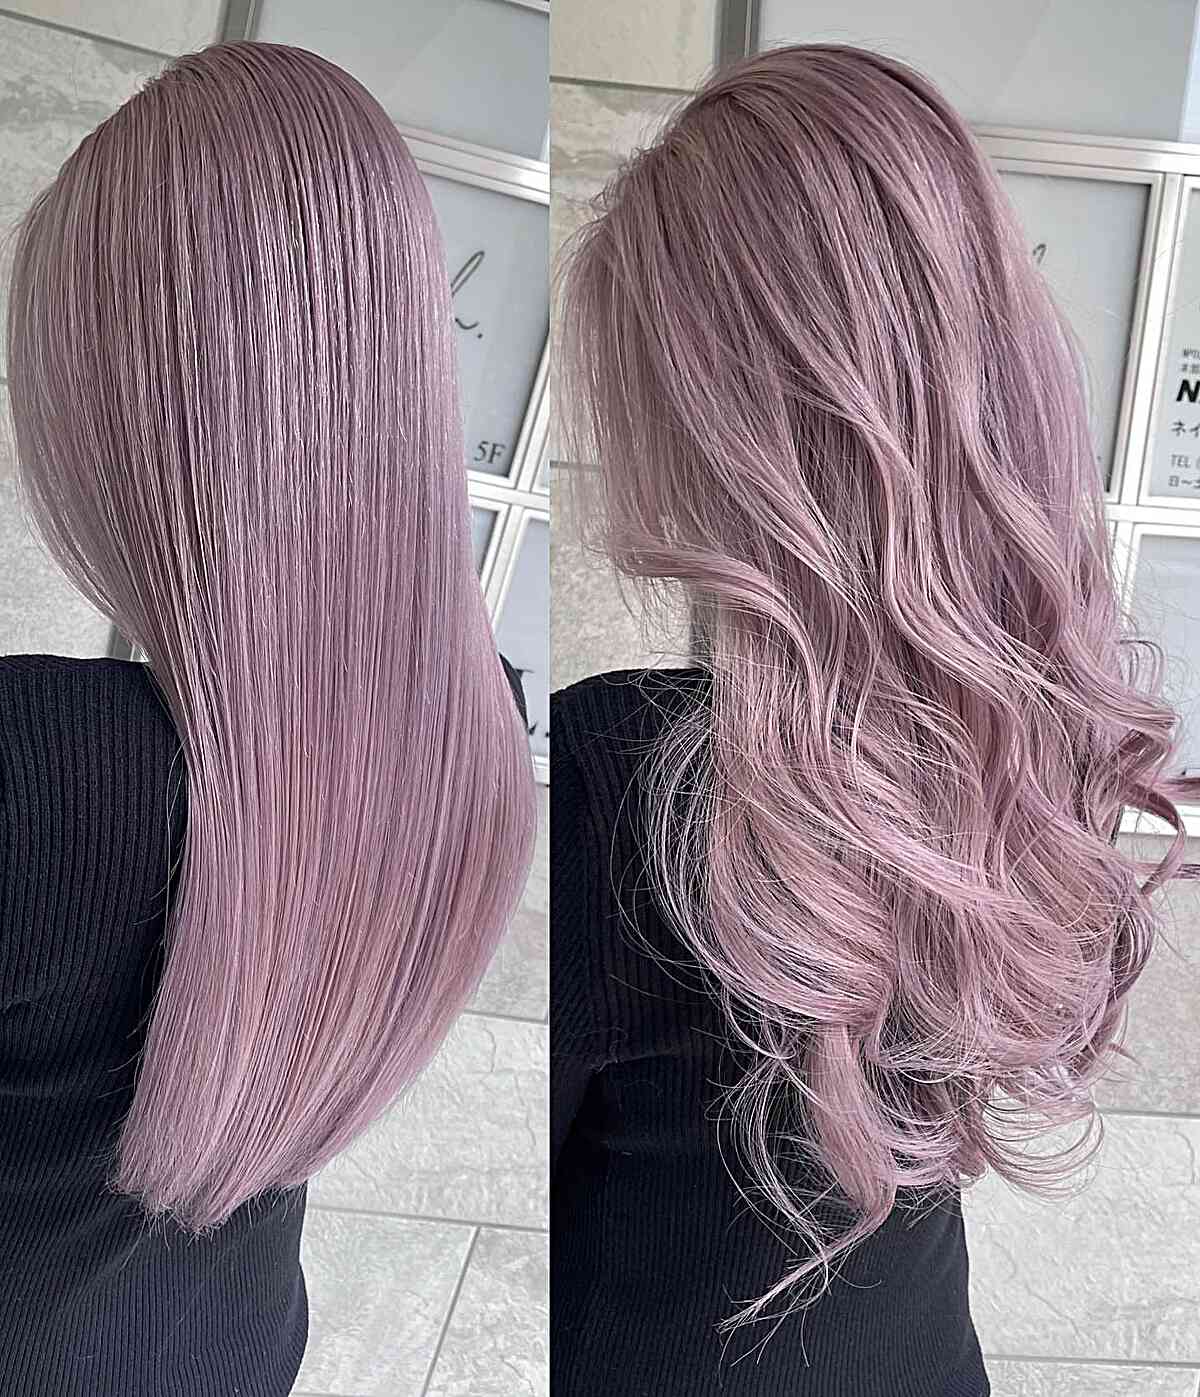 Long Dusted and Muted Pink Hair